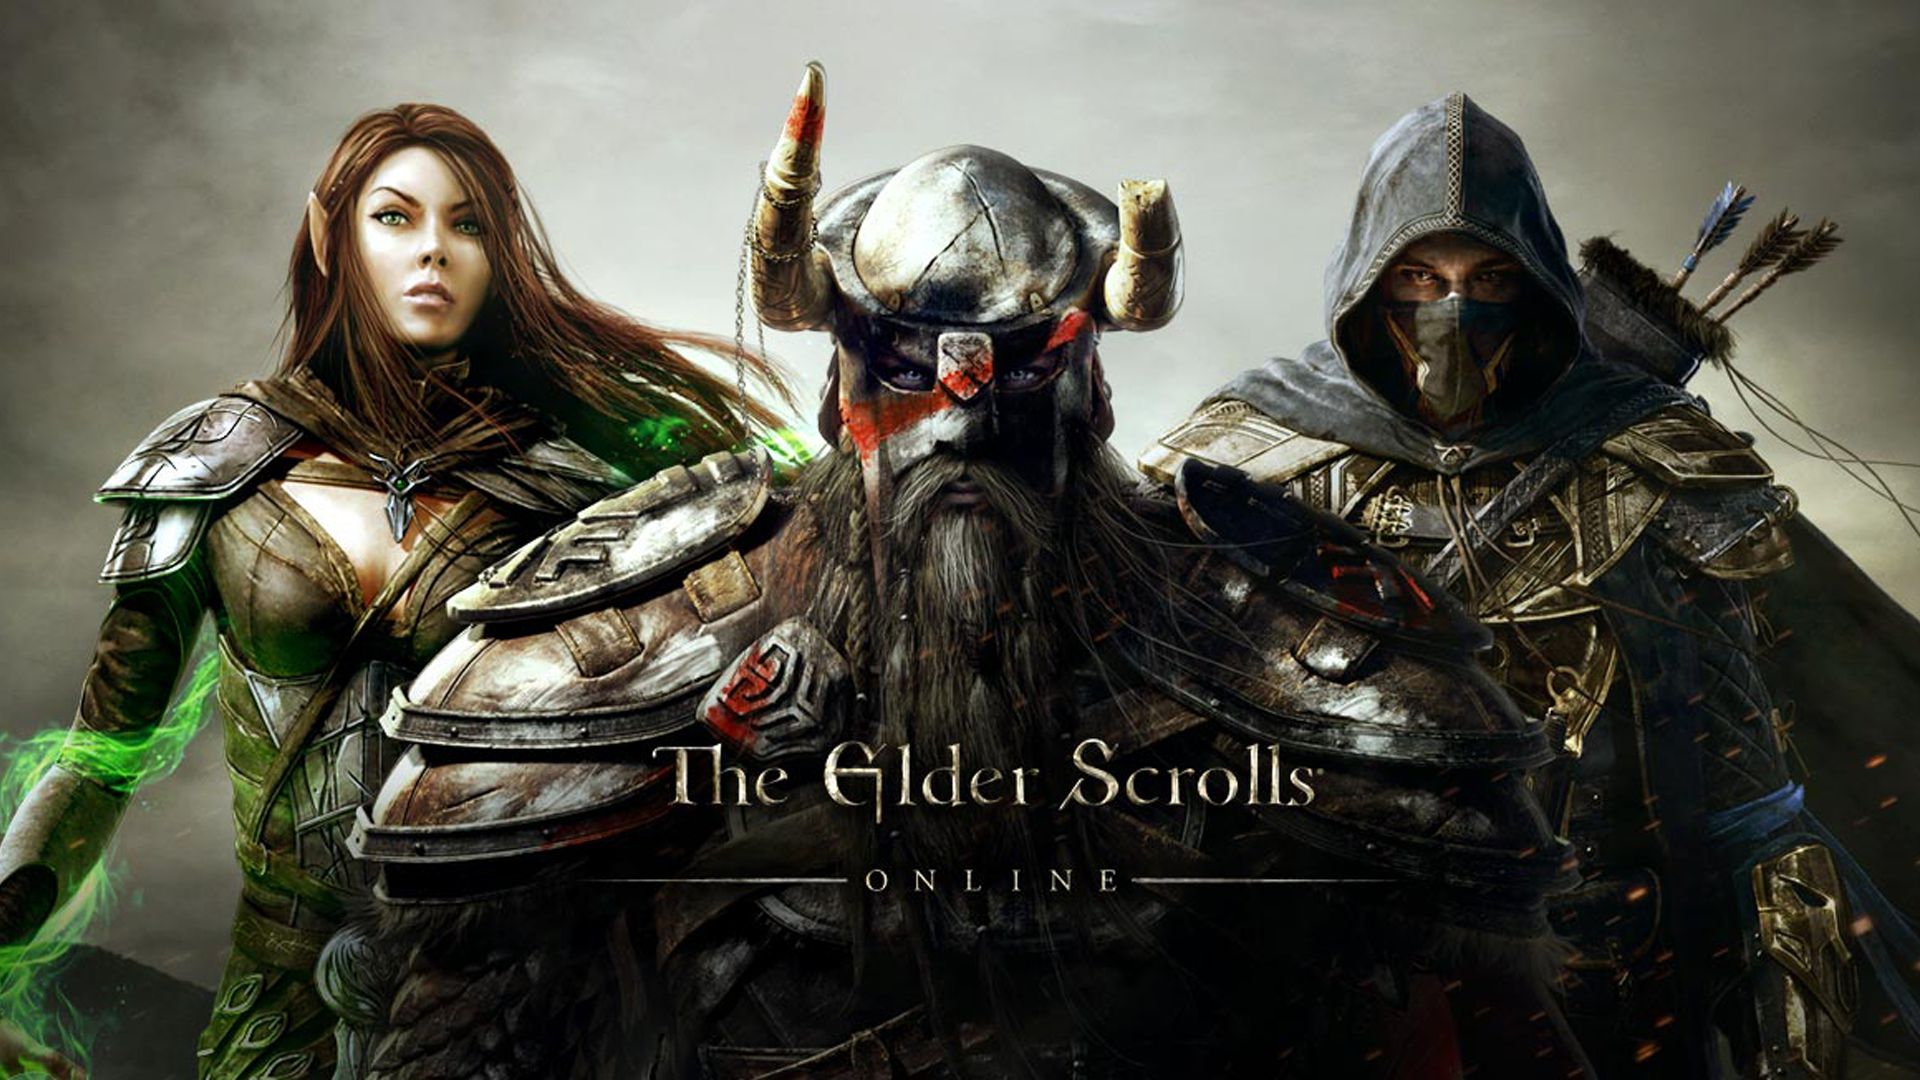 Geek insider, geekinsider, geekinsider. Com,, elder scrolls online to launch april 4th for pc, june for ps4, xbox one, gaming